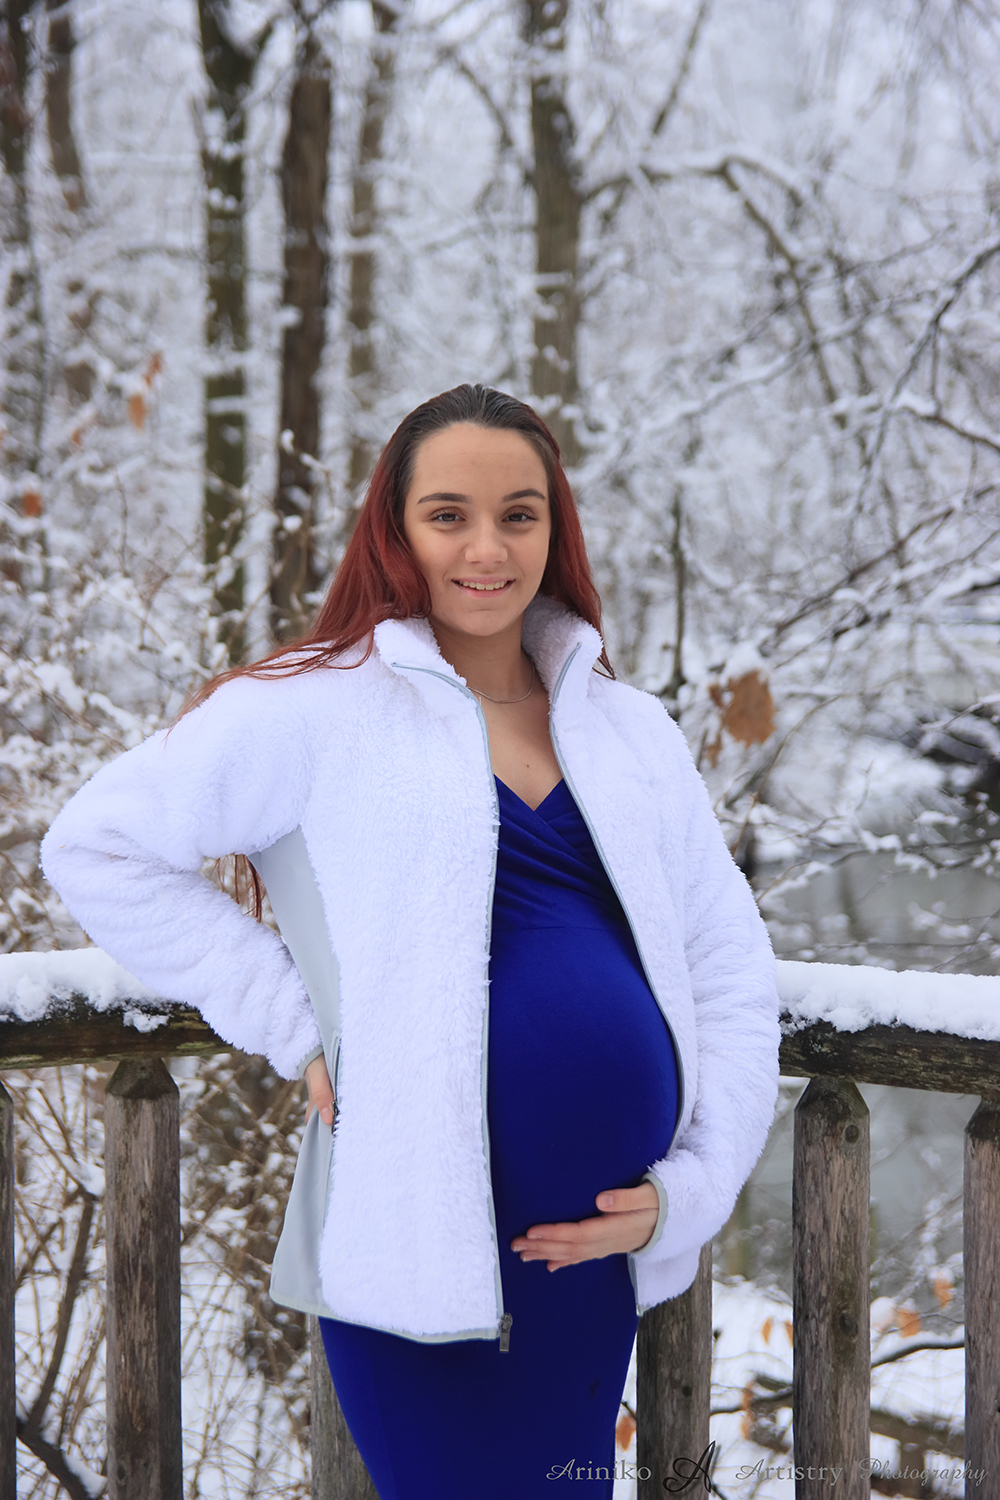 Maternity session in January at Harris Nature Center in Okemos, Michigan